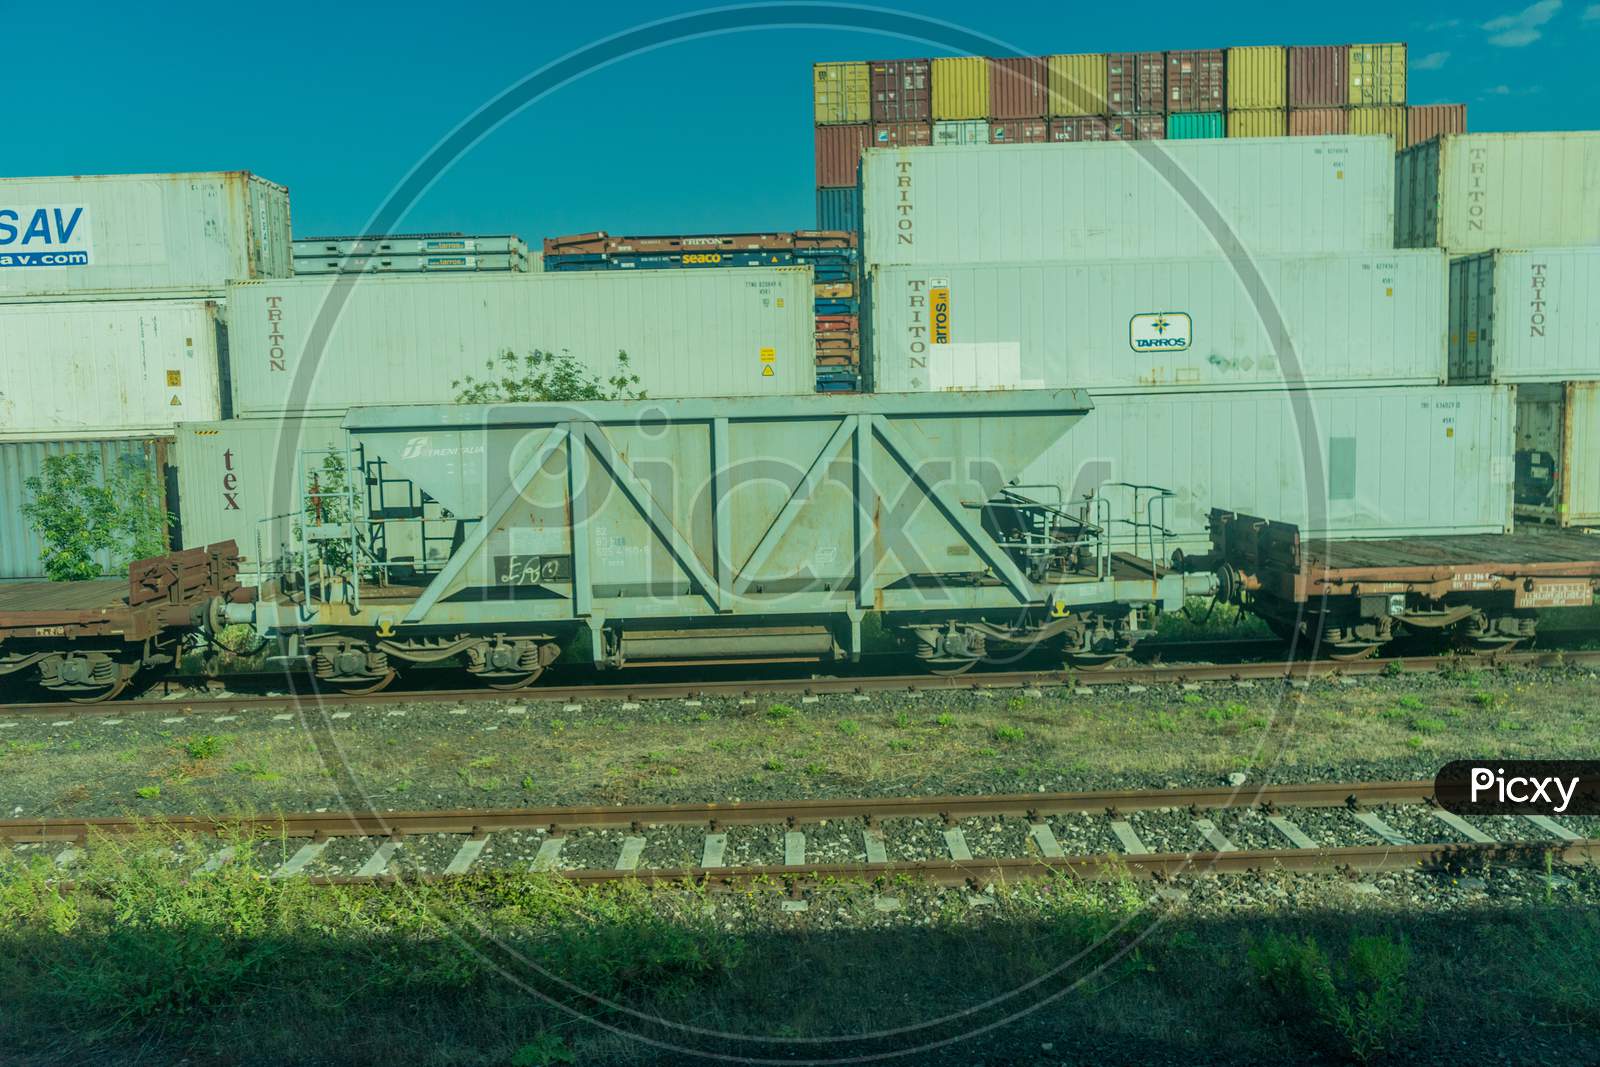 Italy - 28 June 2018: The K Line, Maersk, Cma Cgm, Cai, Arkas,Triton, Sav,Evergreen Container On A Train In Italy